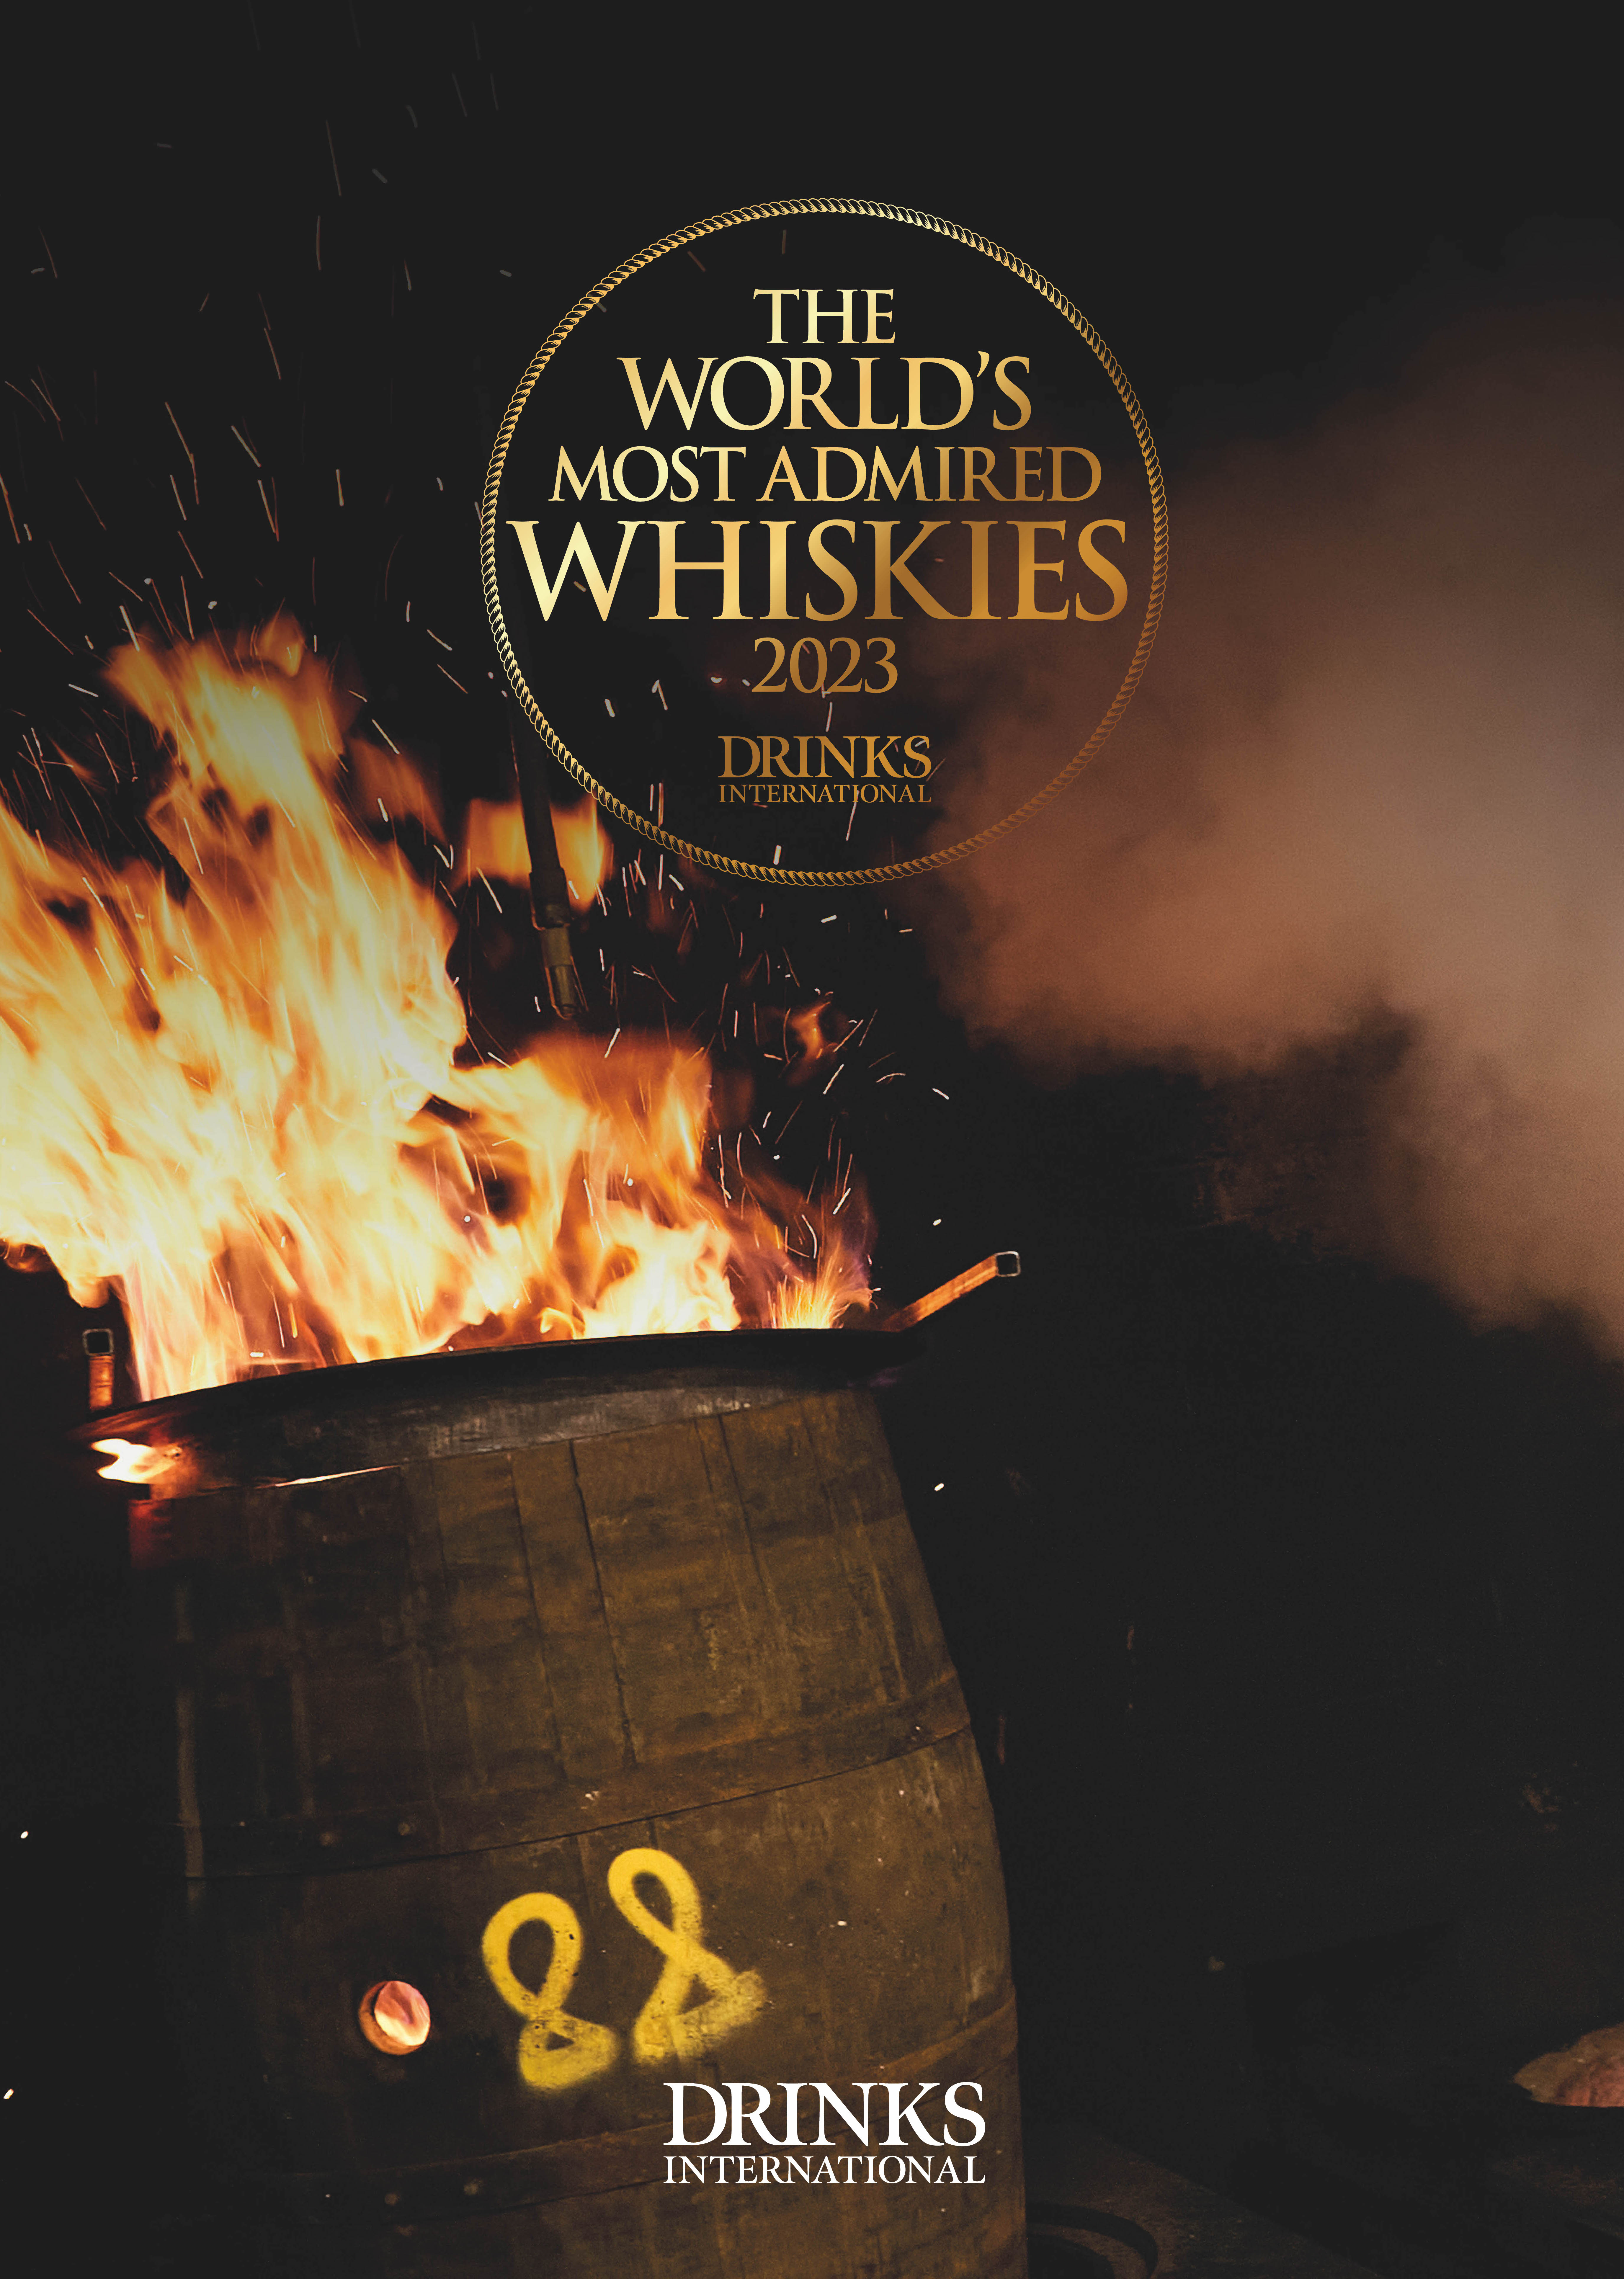 Admired whiskies front cover